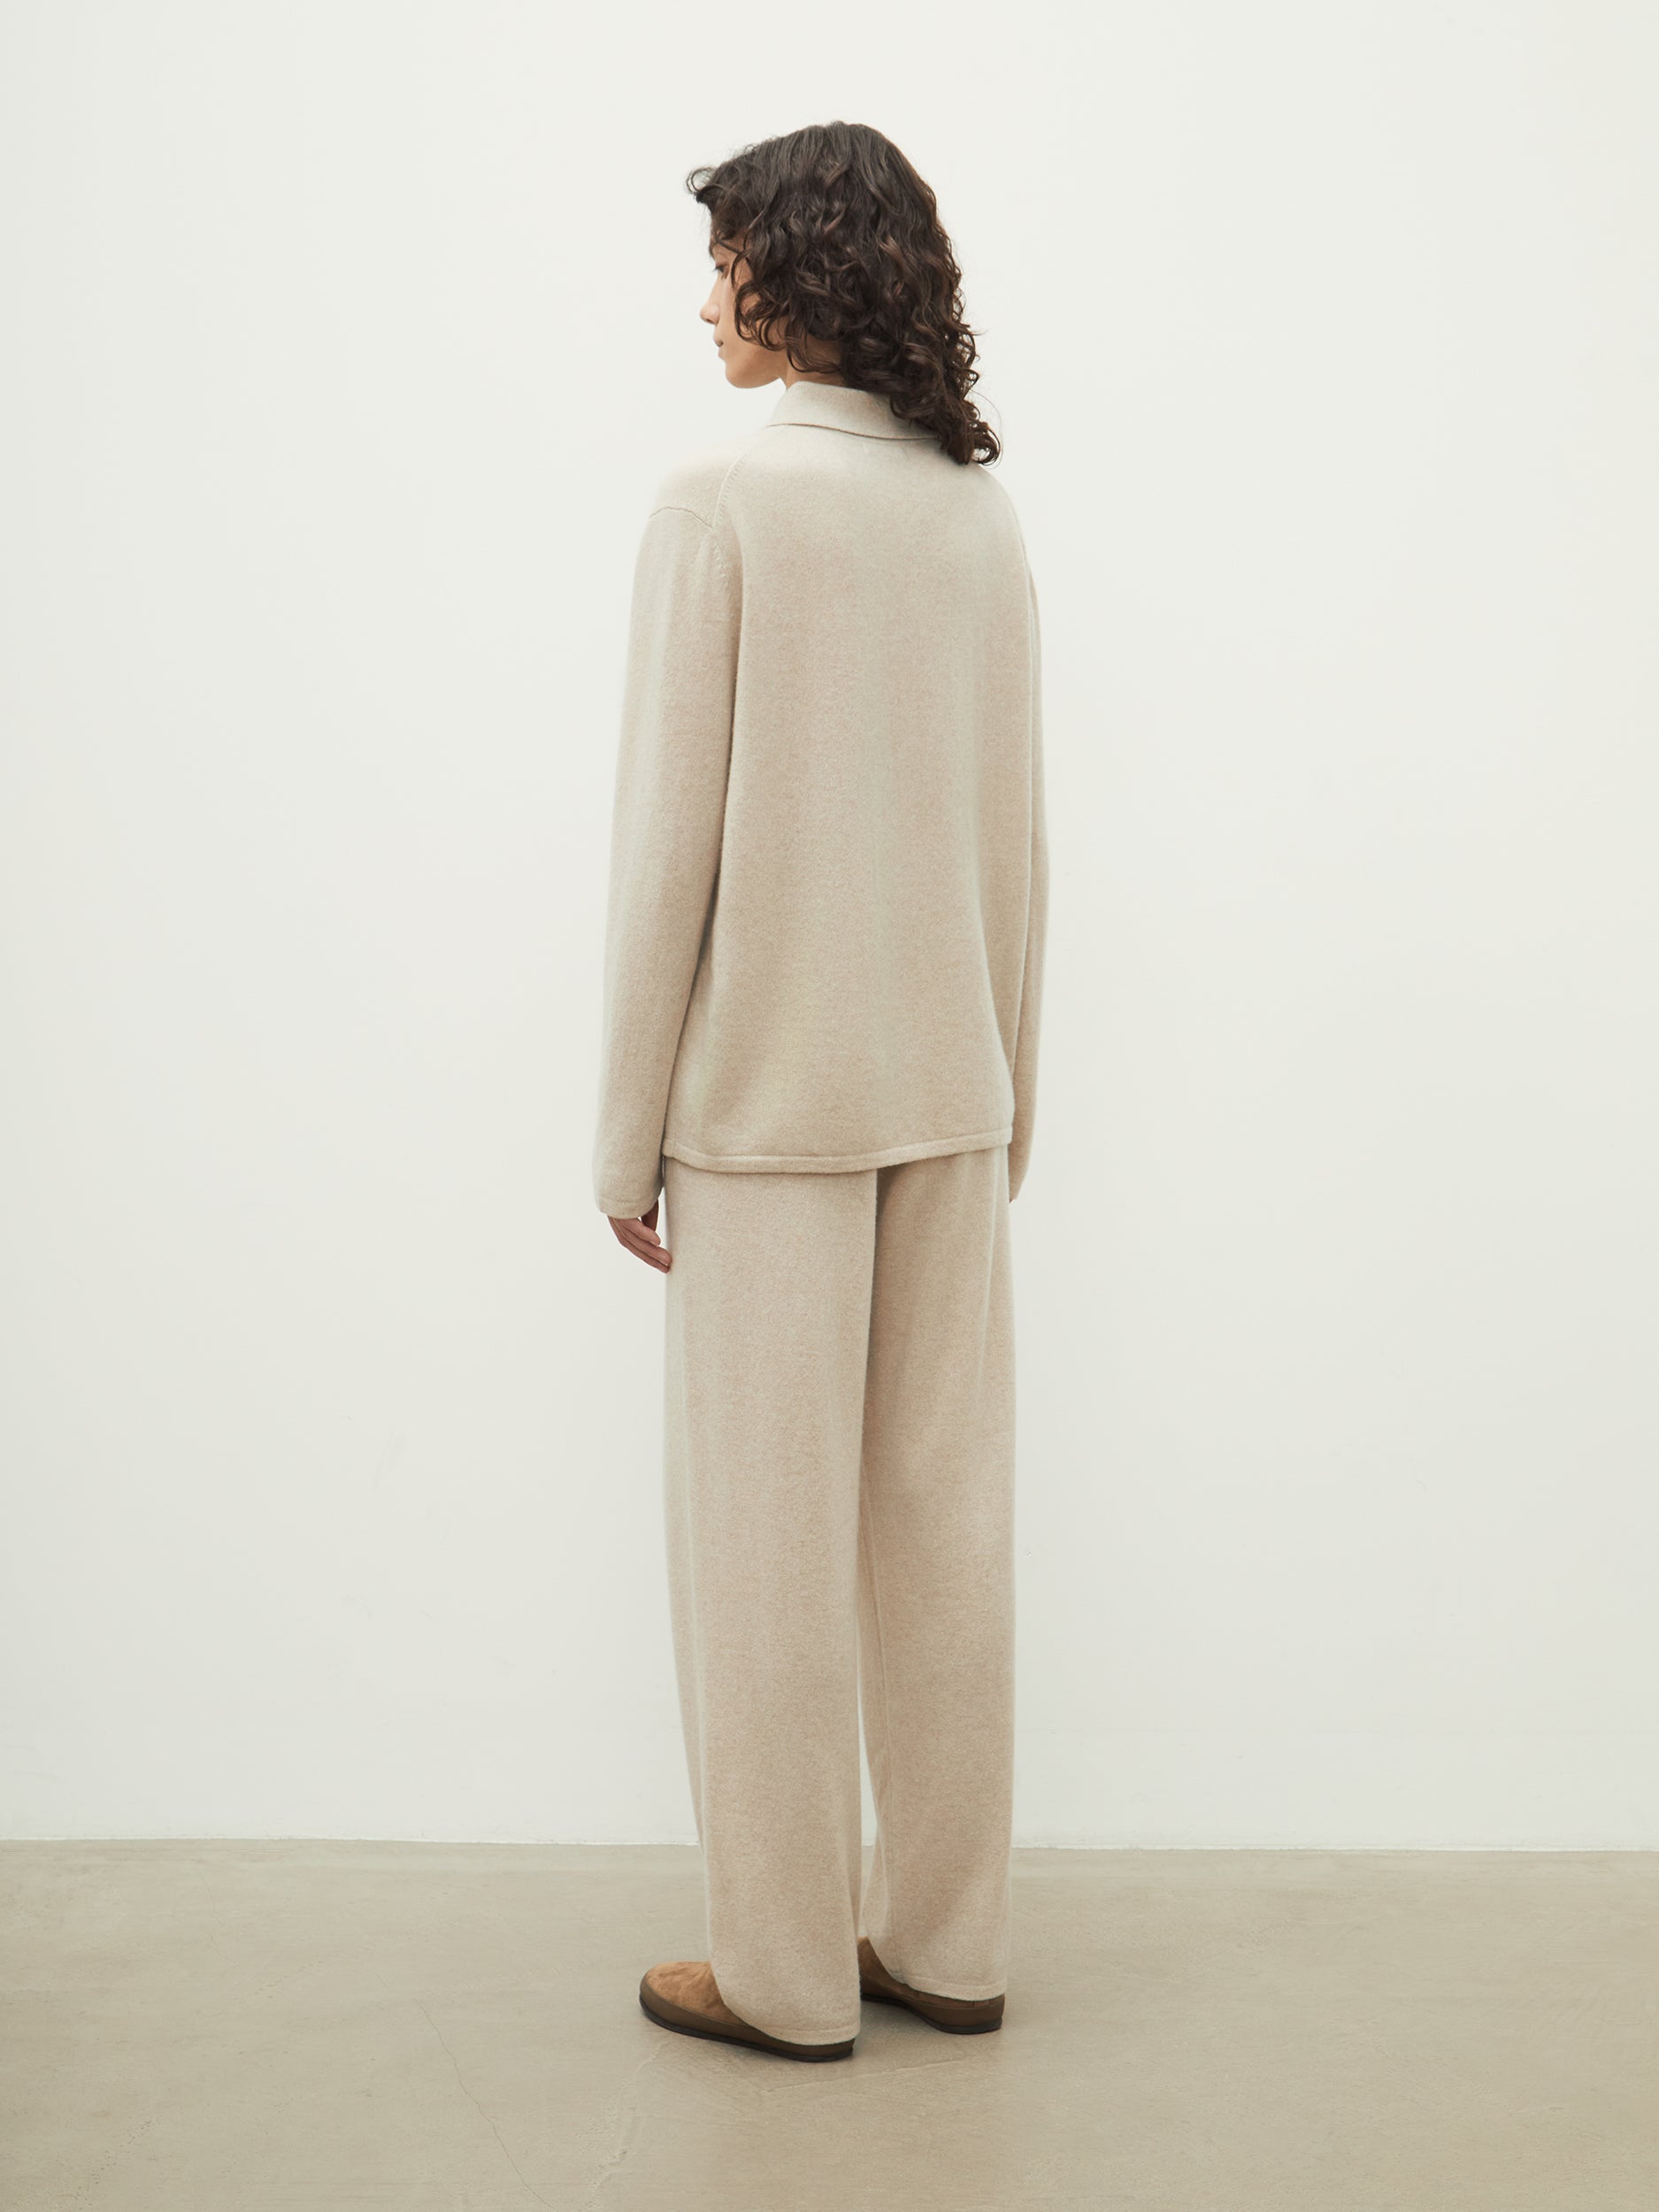 Cashmere button fly trousers